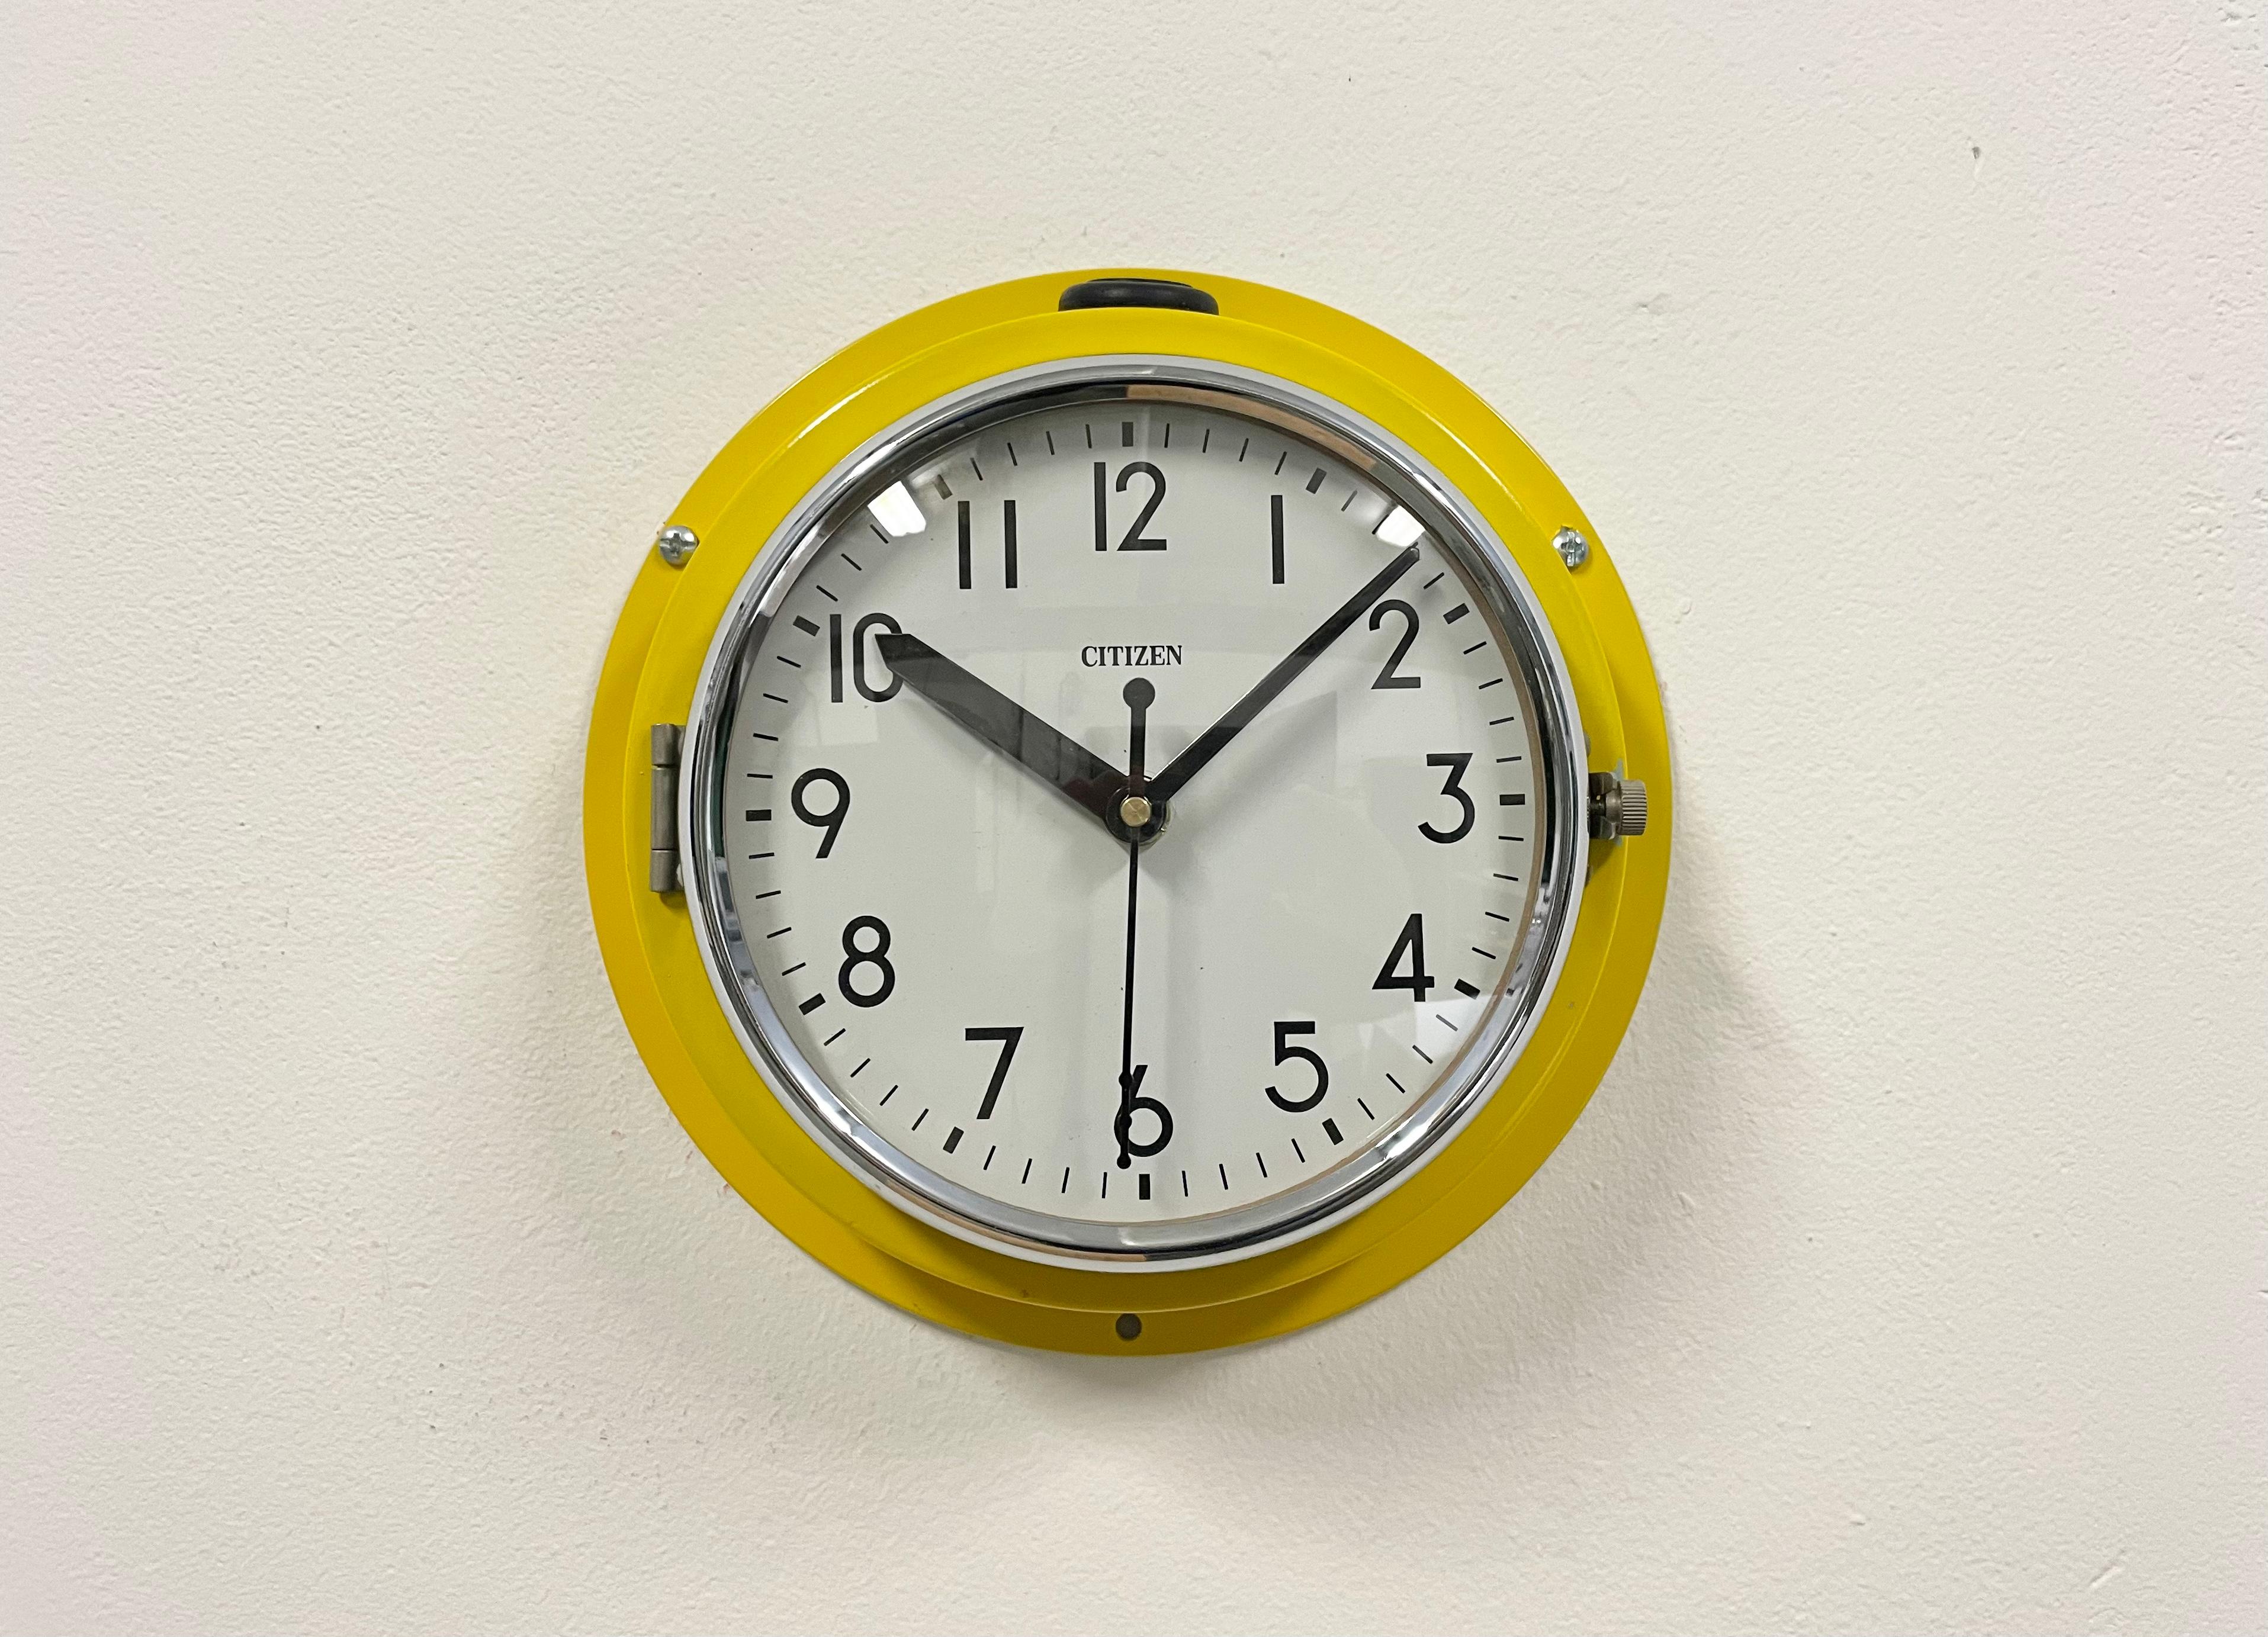 Vintage Citizen navy slave clock designed during the 1970s and produced till 1990s. These clocks were used on large Japanese tankers and cargo ships. It features a yellow metal frame, a plastic dial and curved clear glass cover. This item has been